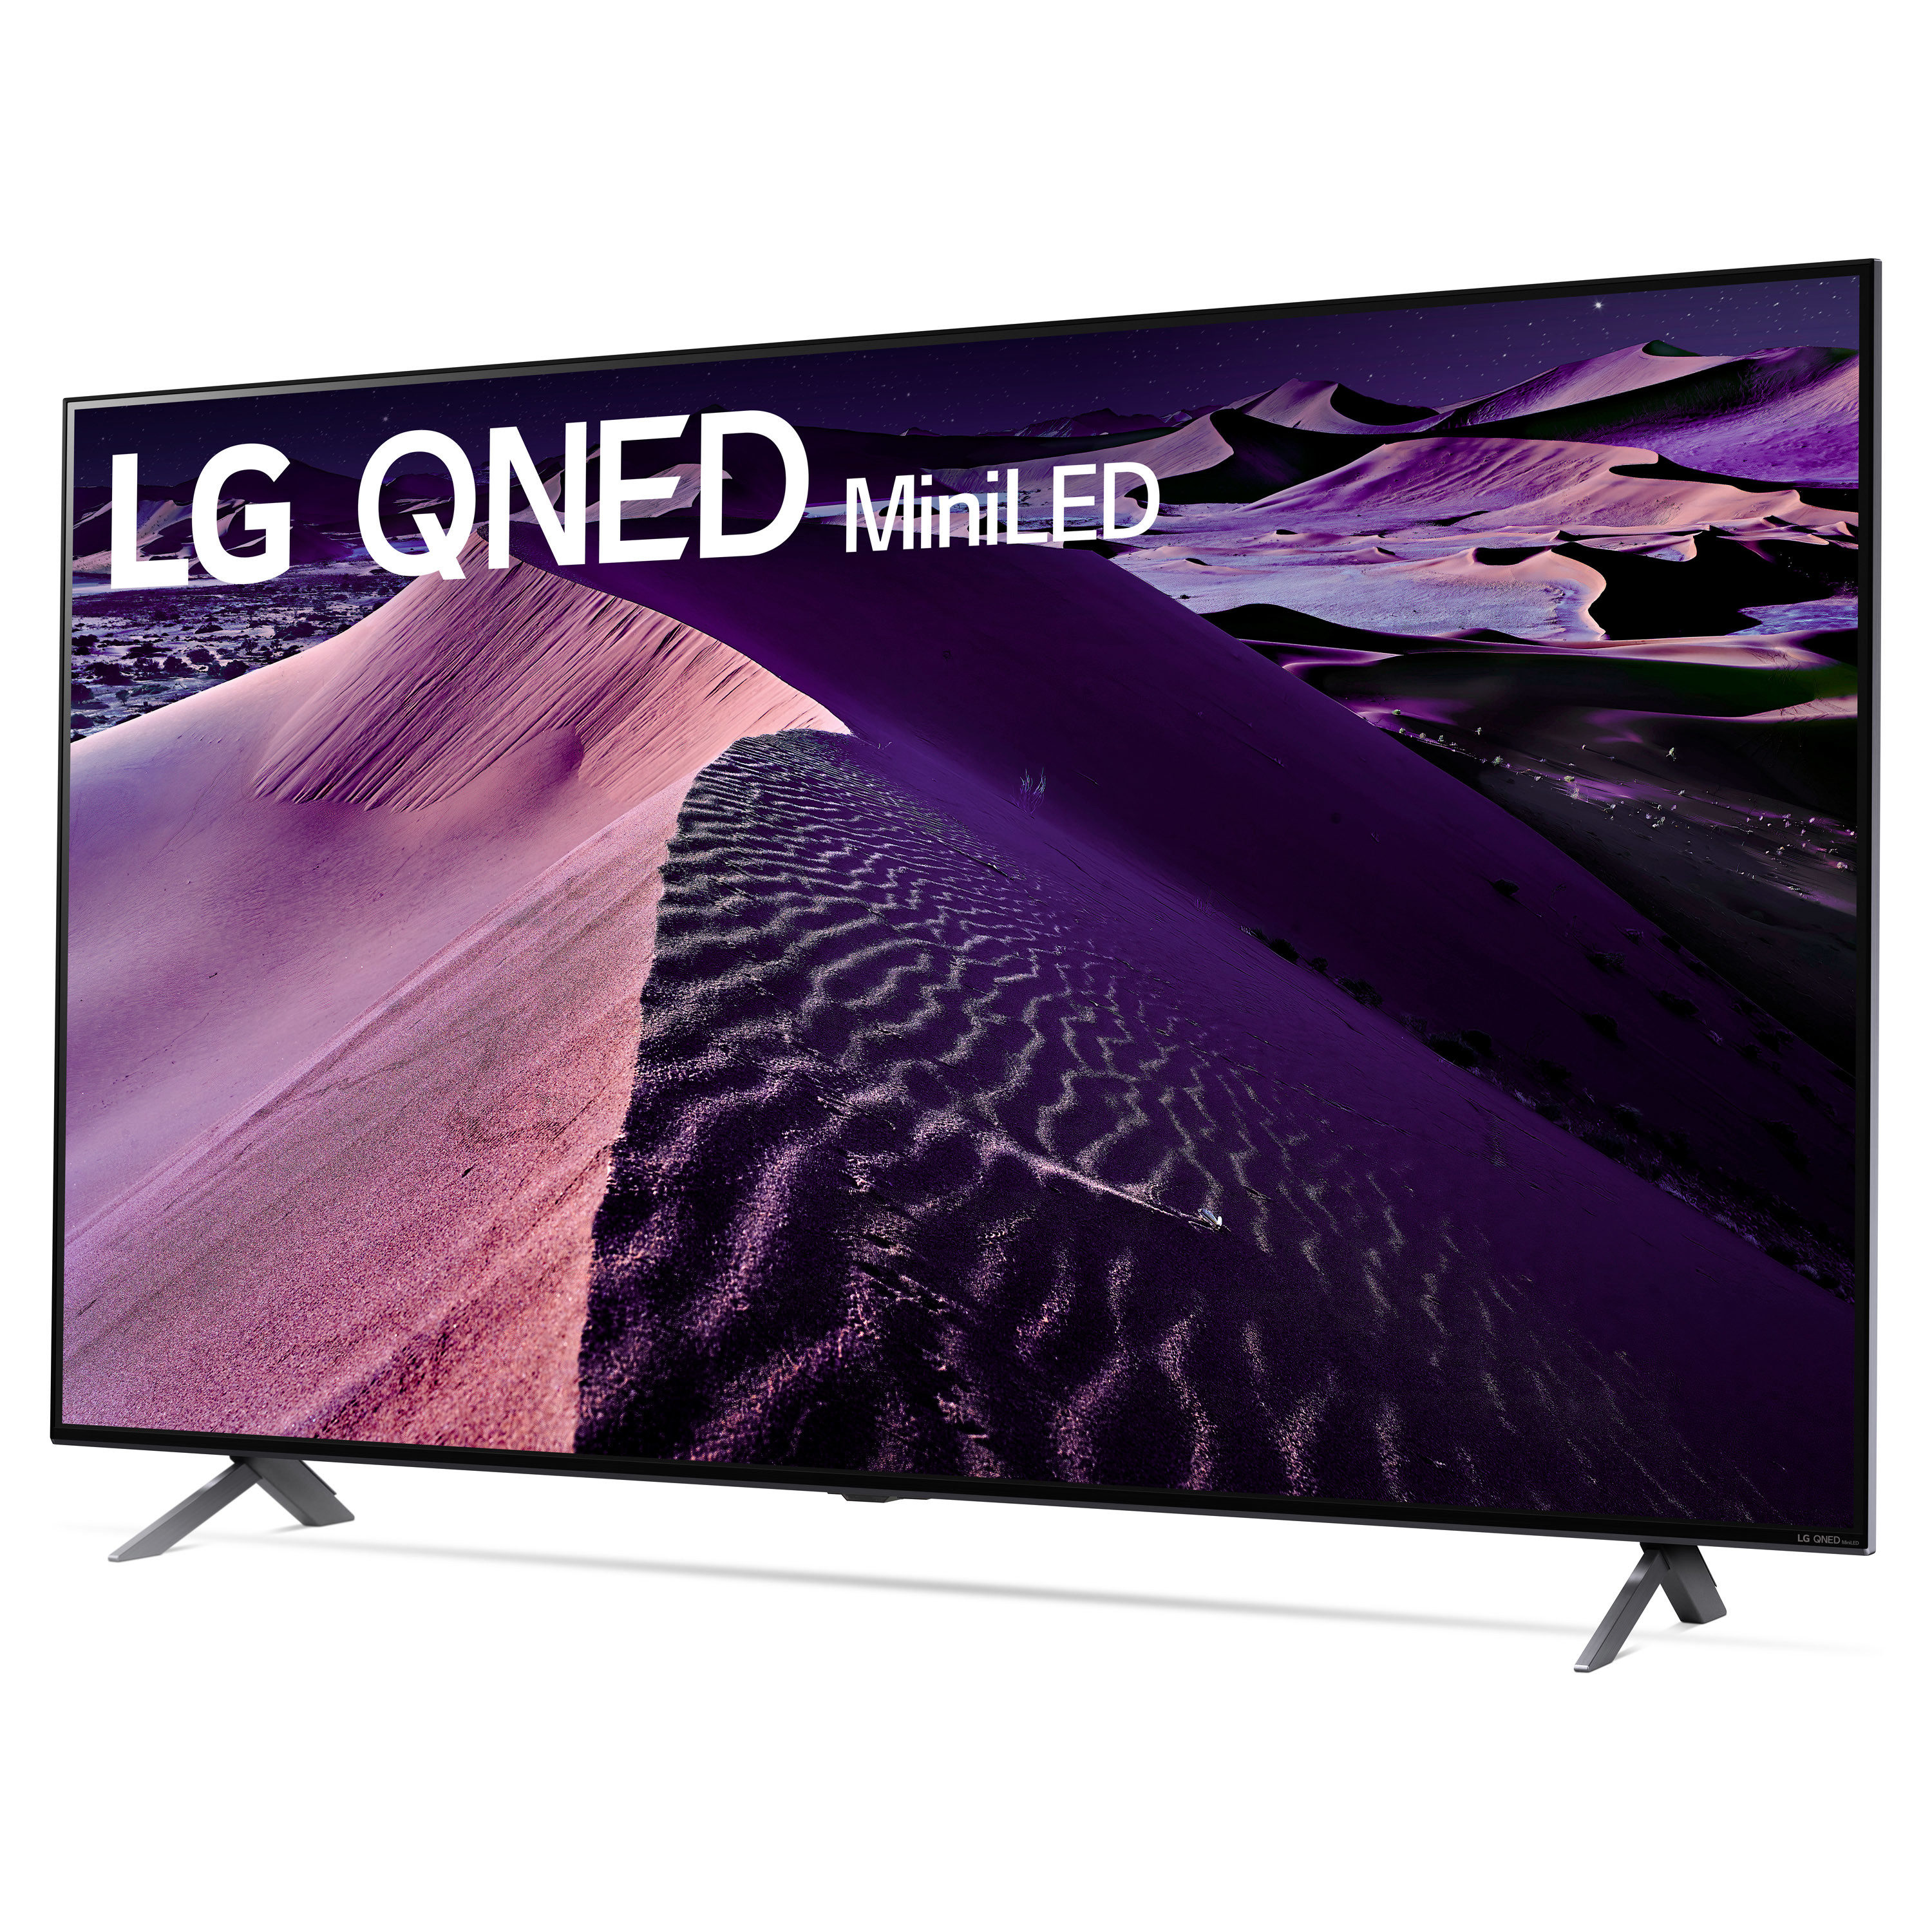 LG 50QNED80URA (50) QNED 80 Series Quantum Dot NanoCell Smart LED 4K UHD  TV with HDR at Crutchfield